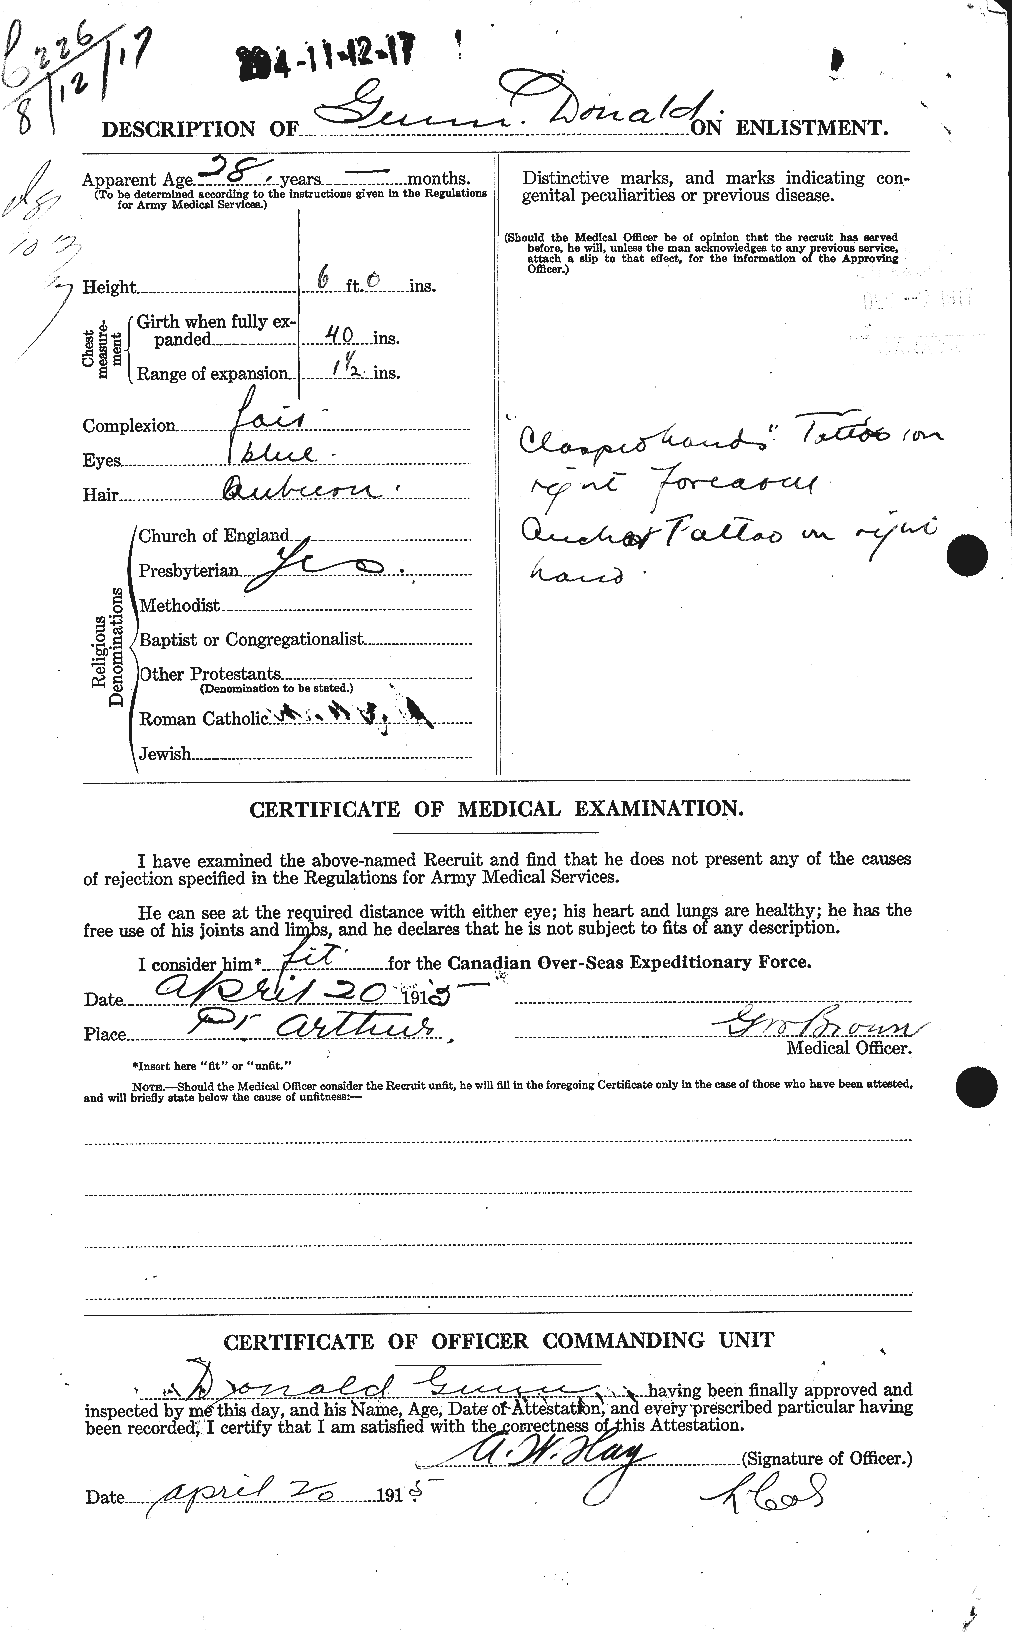 Personnel Records of the First World War - CEF 368028b